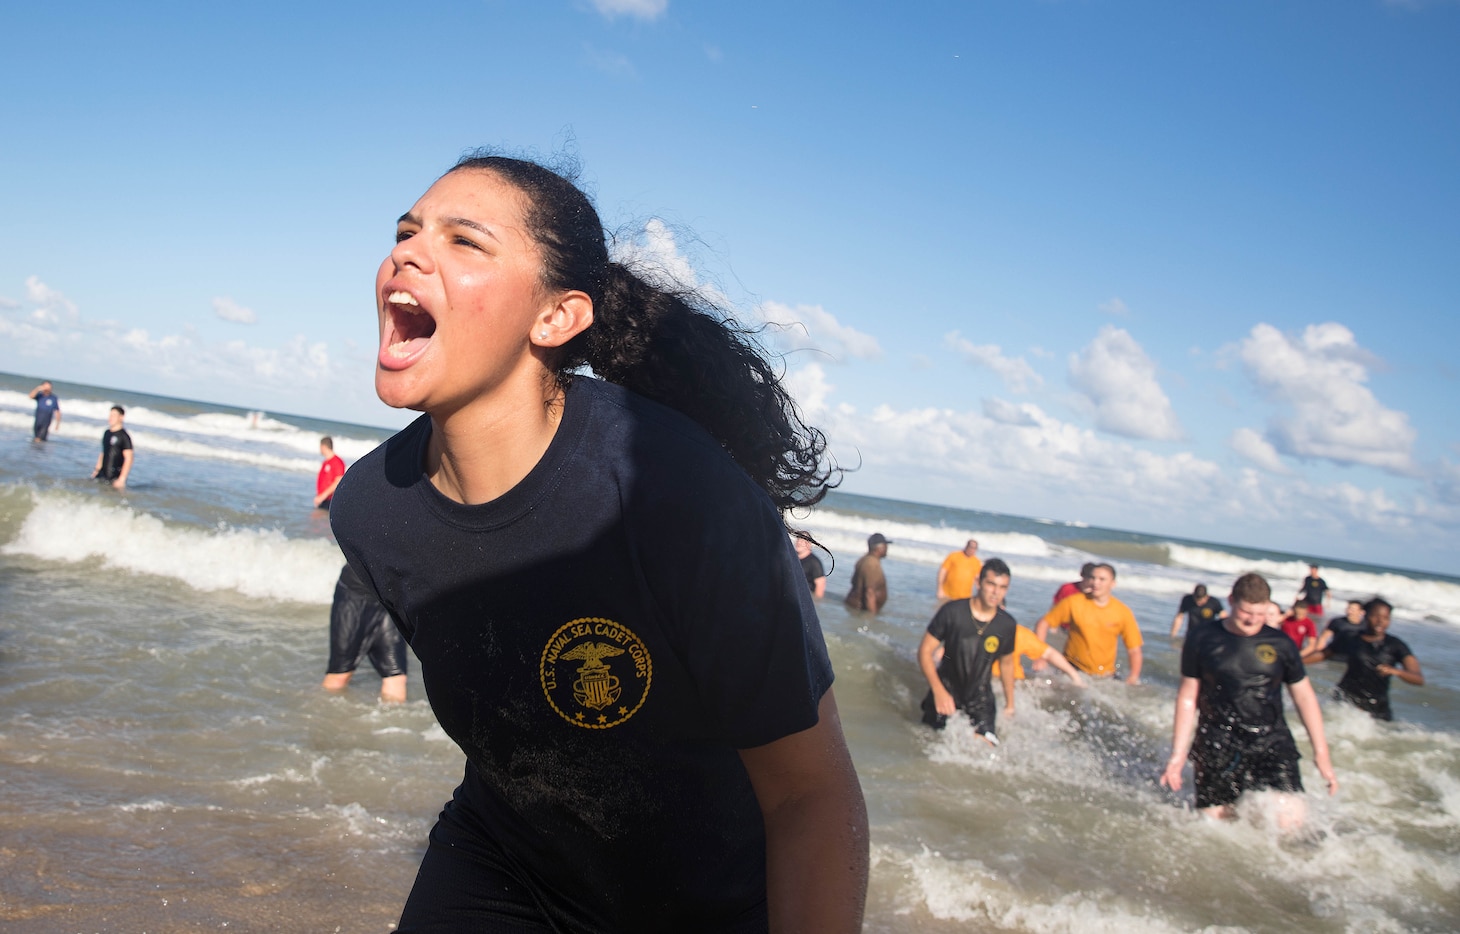 171104-N-PJ969-1169 FORT PIERCE, Fla., (Nov. 4, 2017) U.S. Naval Sea Cadet Corps Petty Officer 1st Class Morales, Centurion Battalion, provides a rallying cry to her cadets during SEAL inspired beach physical training. (U.S. Navy photo by Petty Officer 1st Class Abe McNatt)